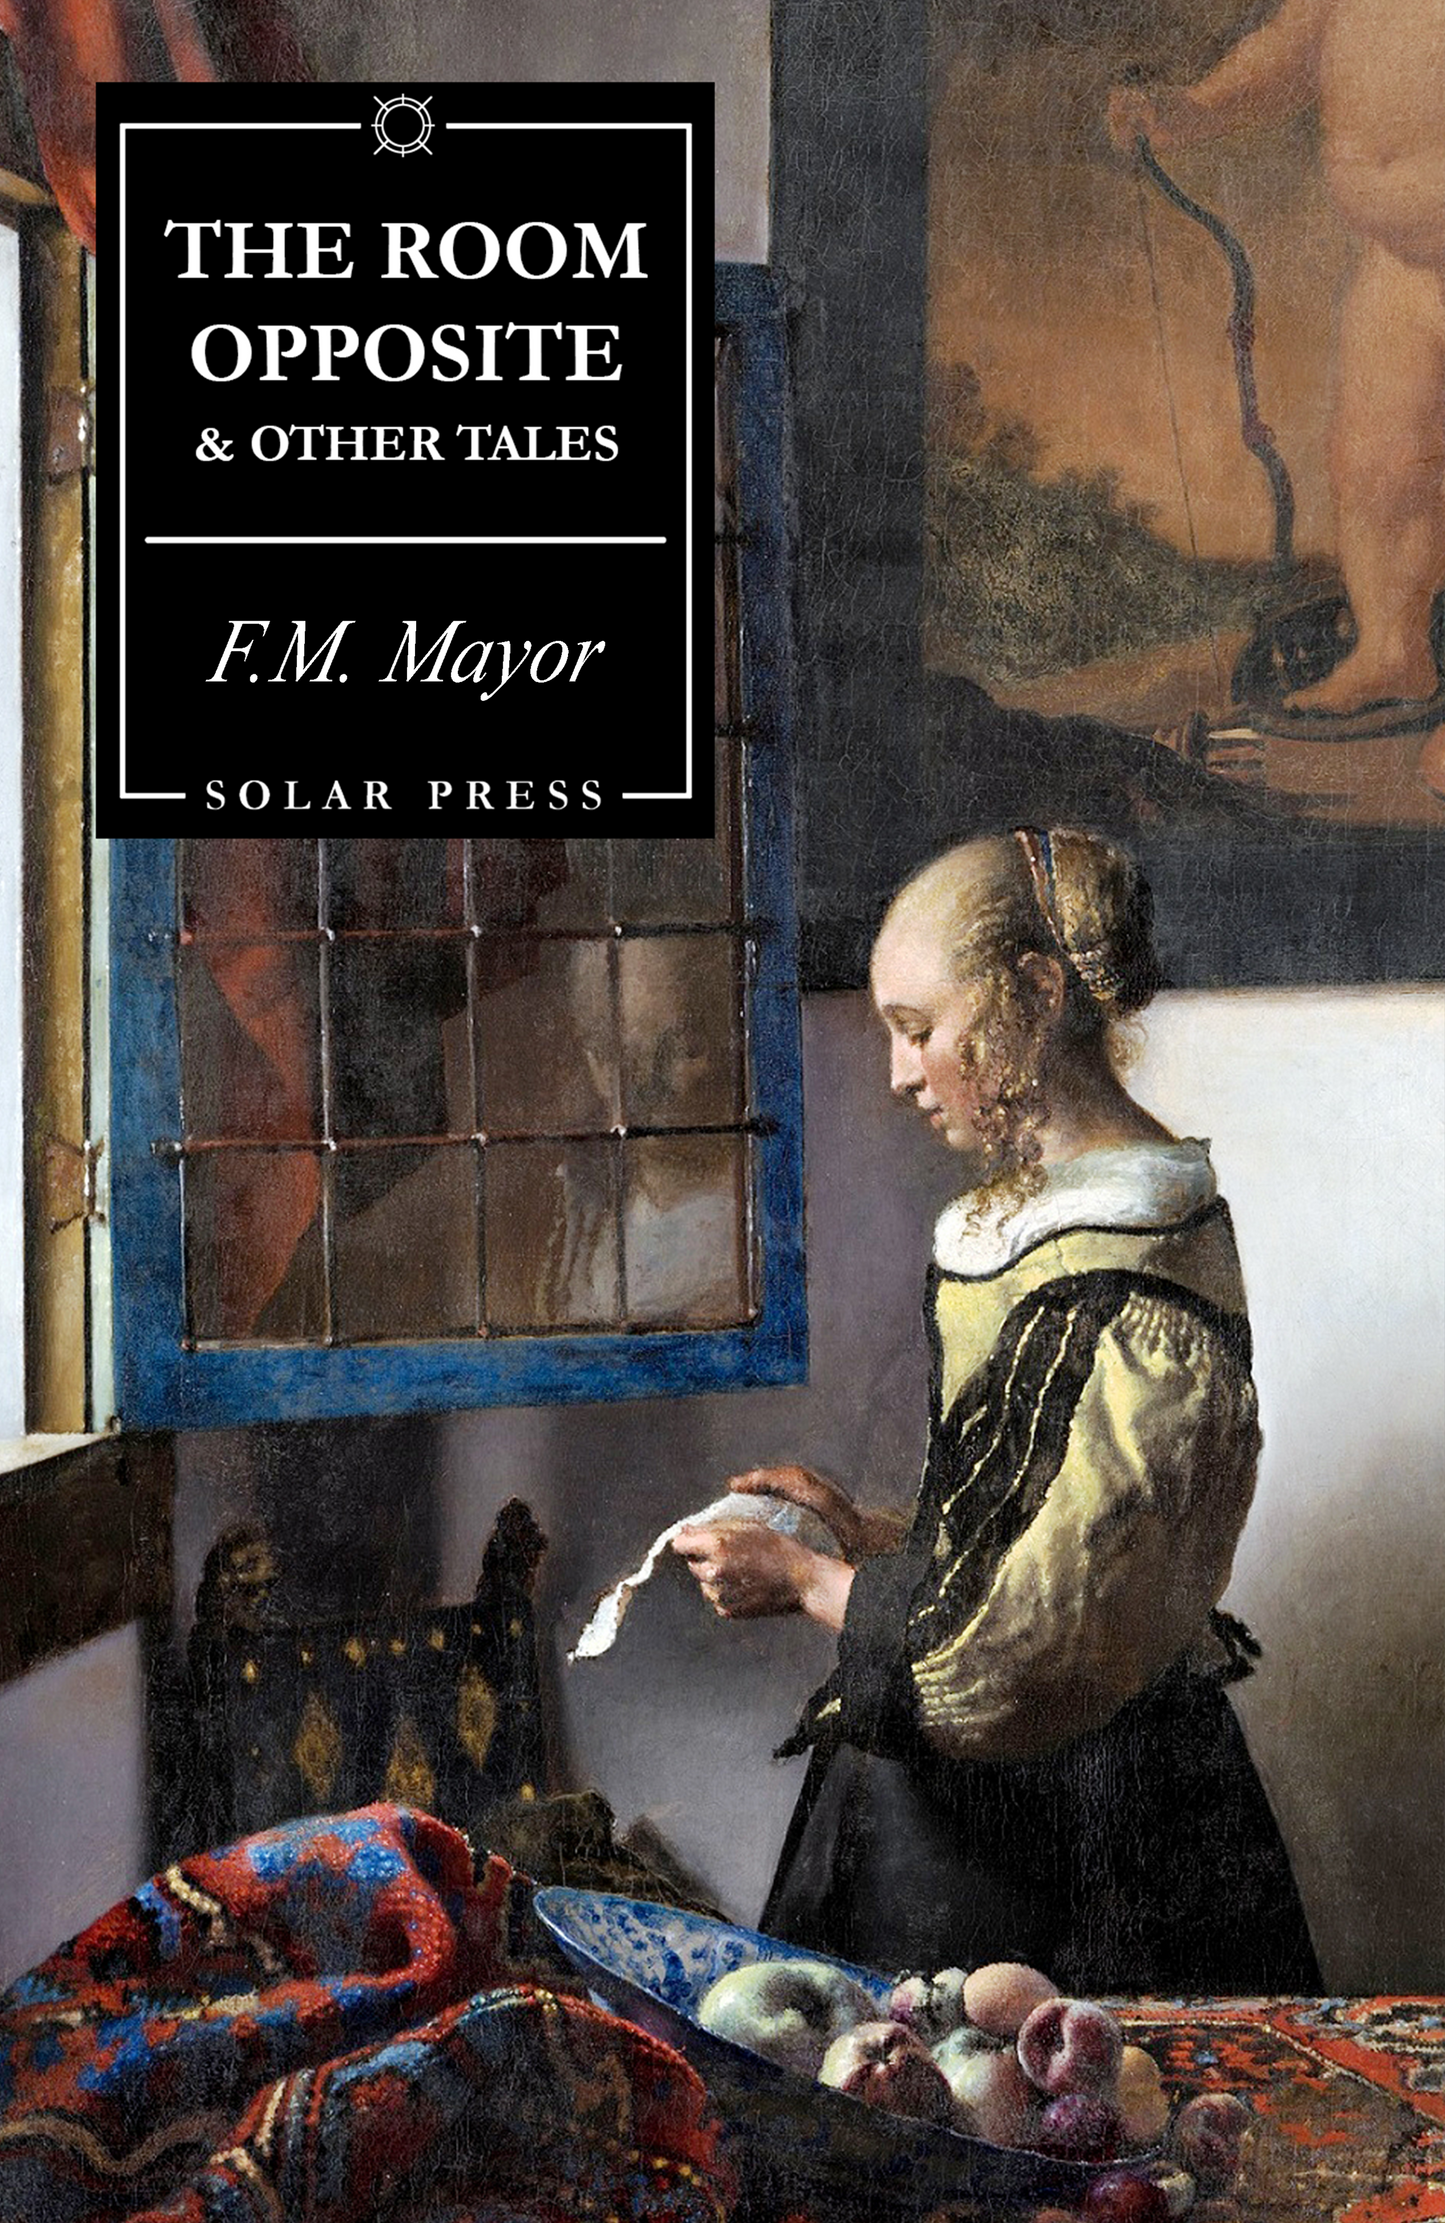 The Room Opposite & Other Tales by F.M. Mayor